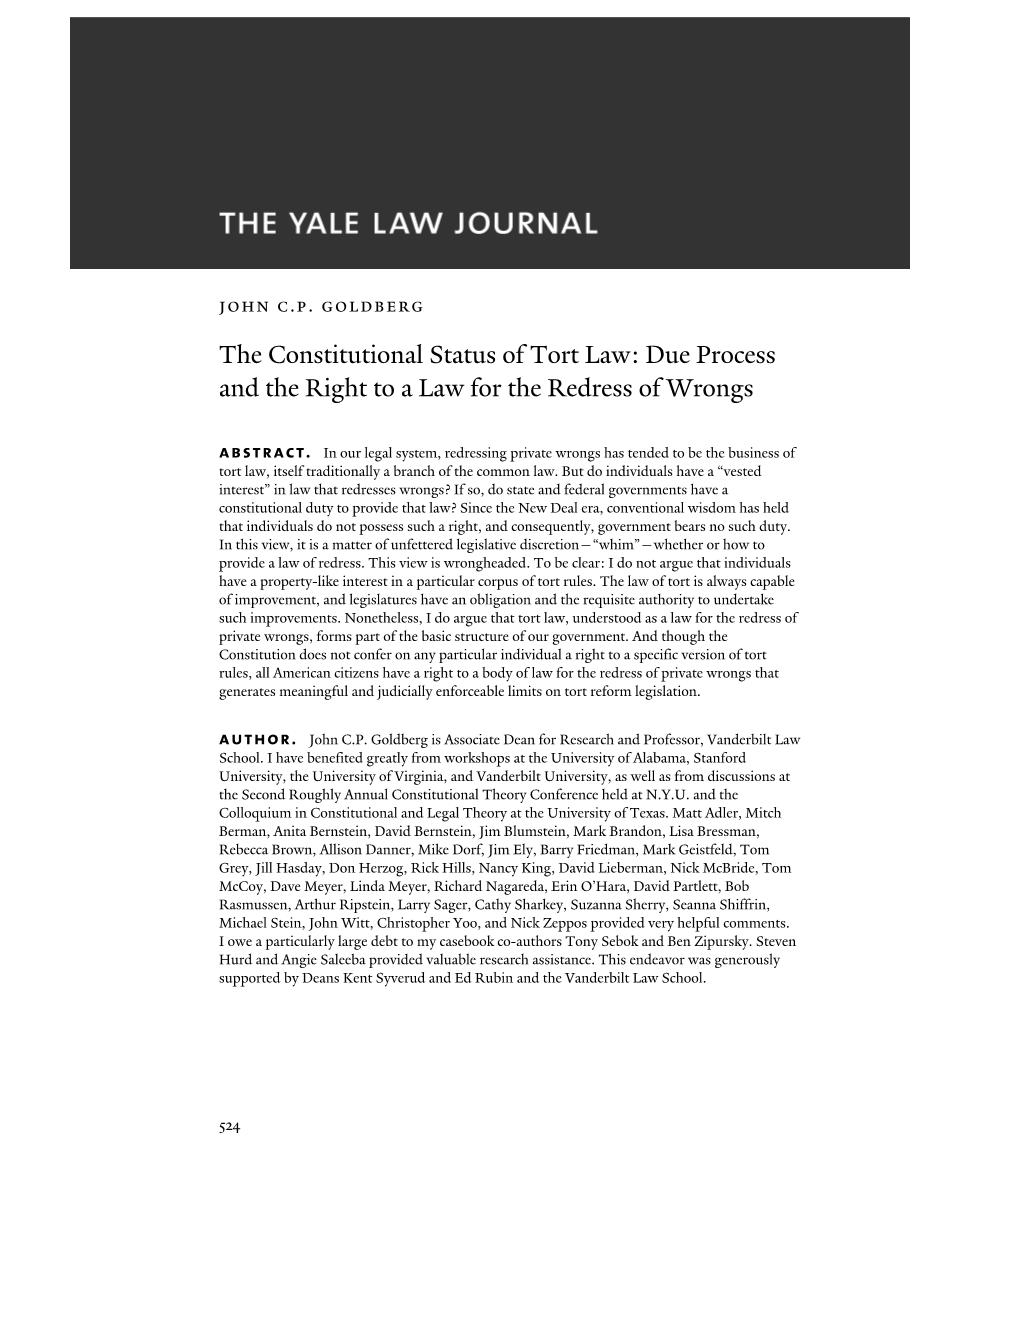 The Constitutional Status of Tort Law: Due Process and the Right to a Law for the Redress of Wrongs Abstract